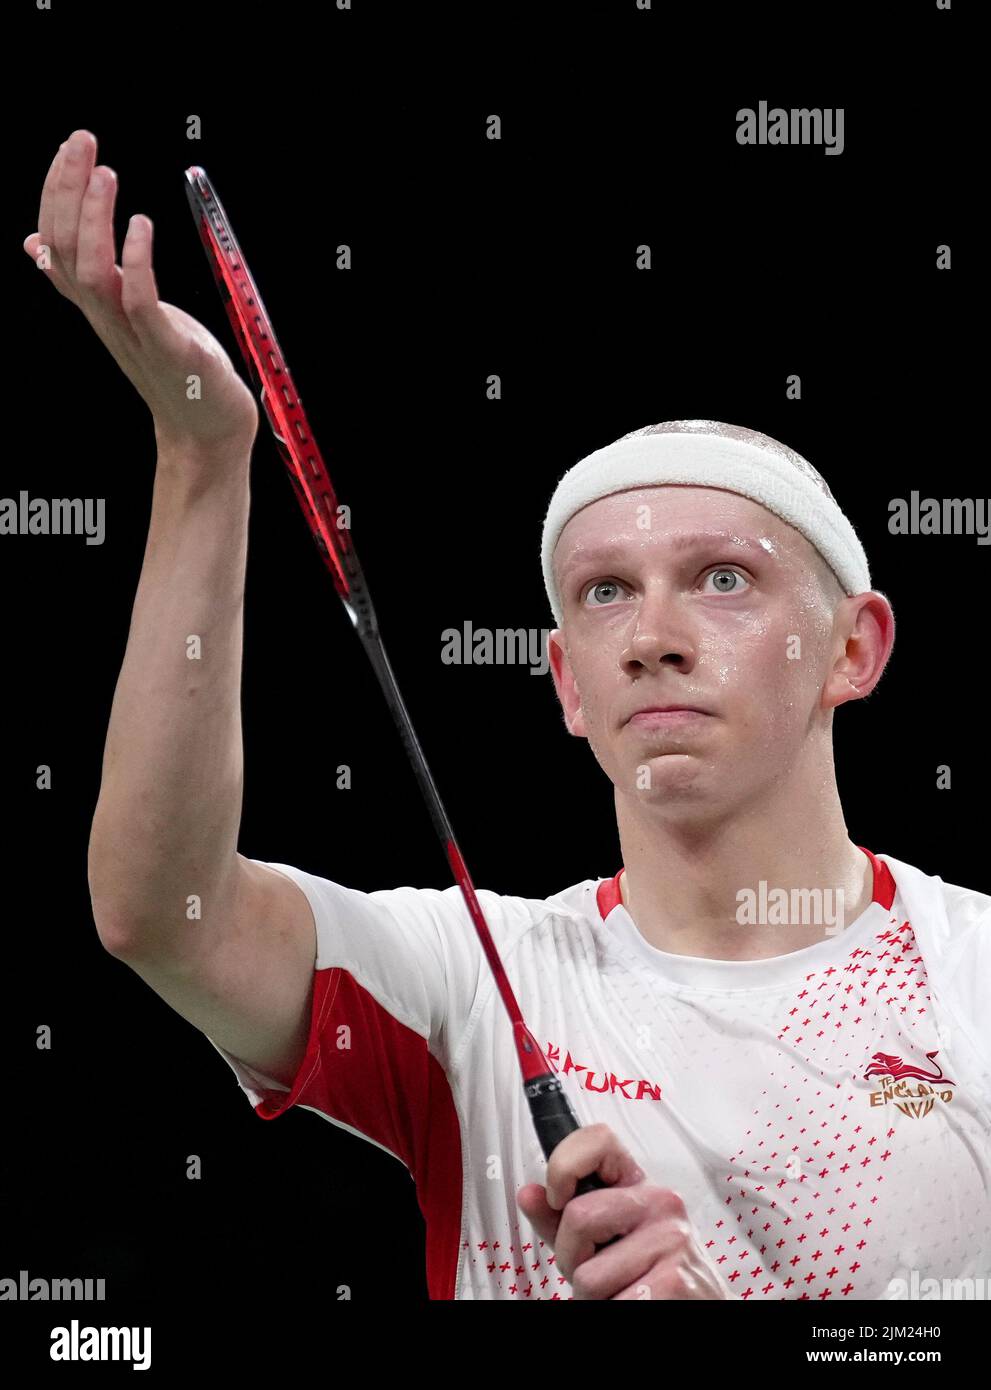 England's Toby Penty celebrates victory after his match against Australia's Nathan Tang at The NEC on day seven of the 2022 Commonwealth Games in Birmingham. Picture date: Thursday August 4, 2022. Stock Photo